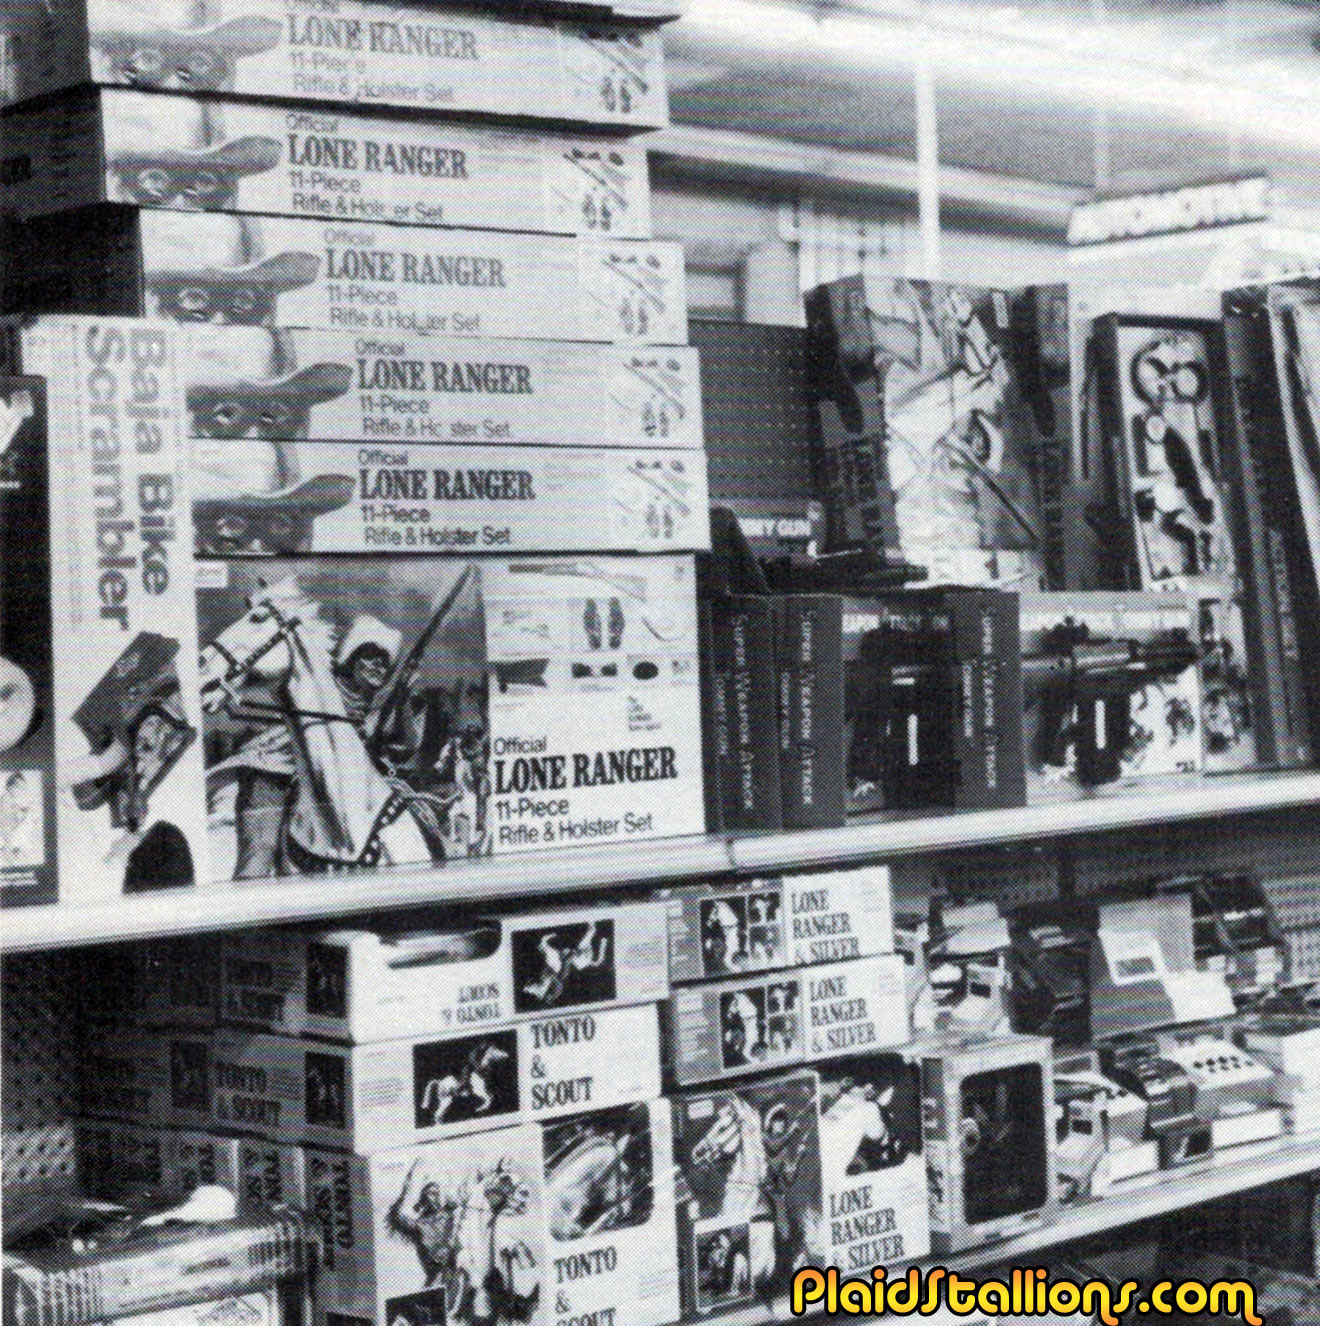 Lone Ranger Toys on display in 1980